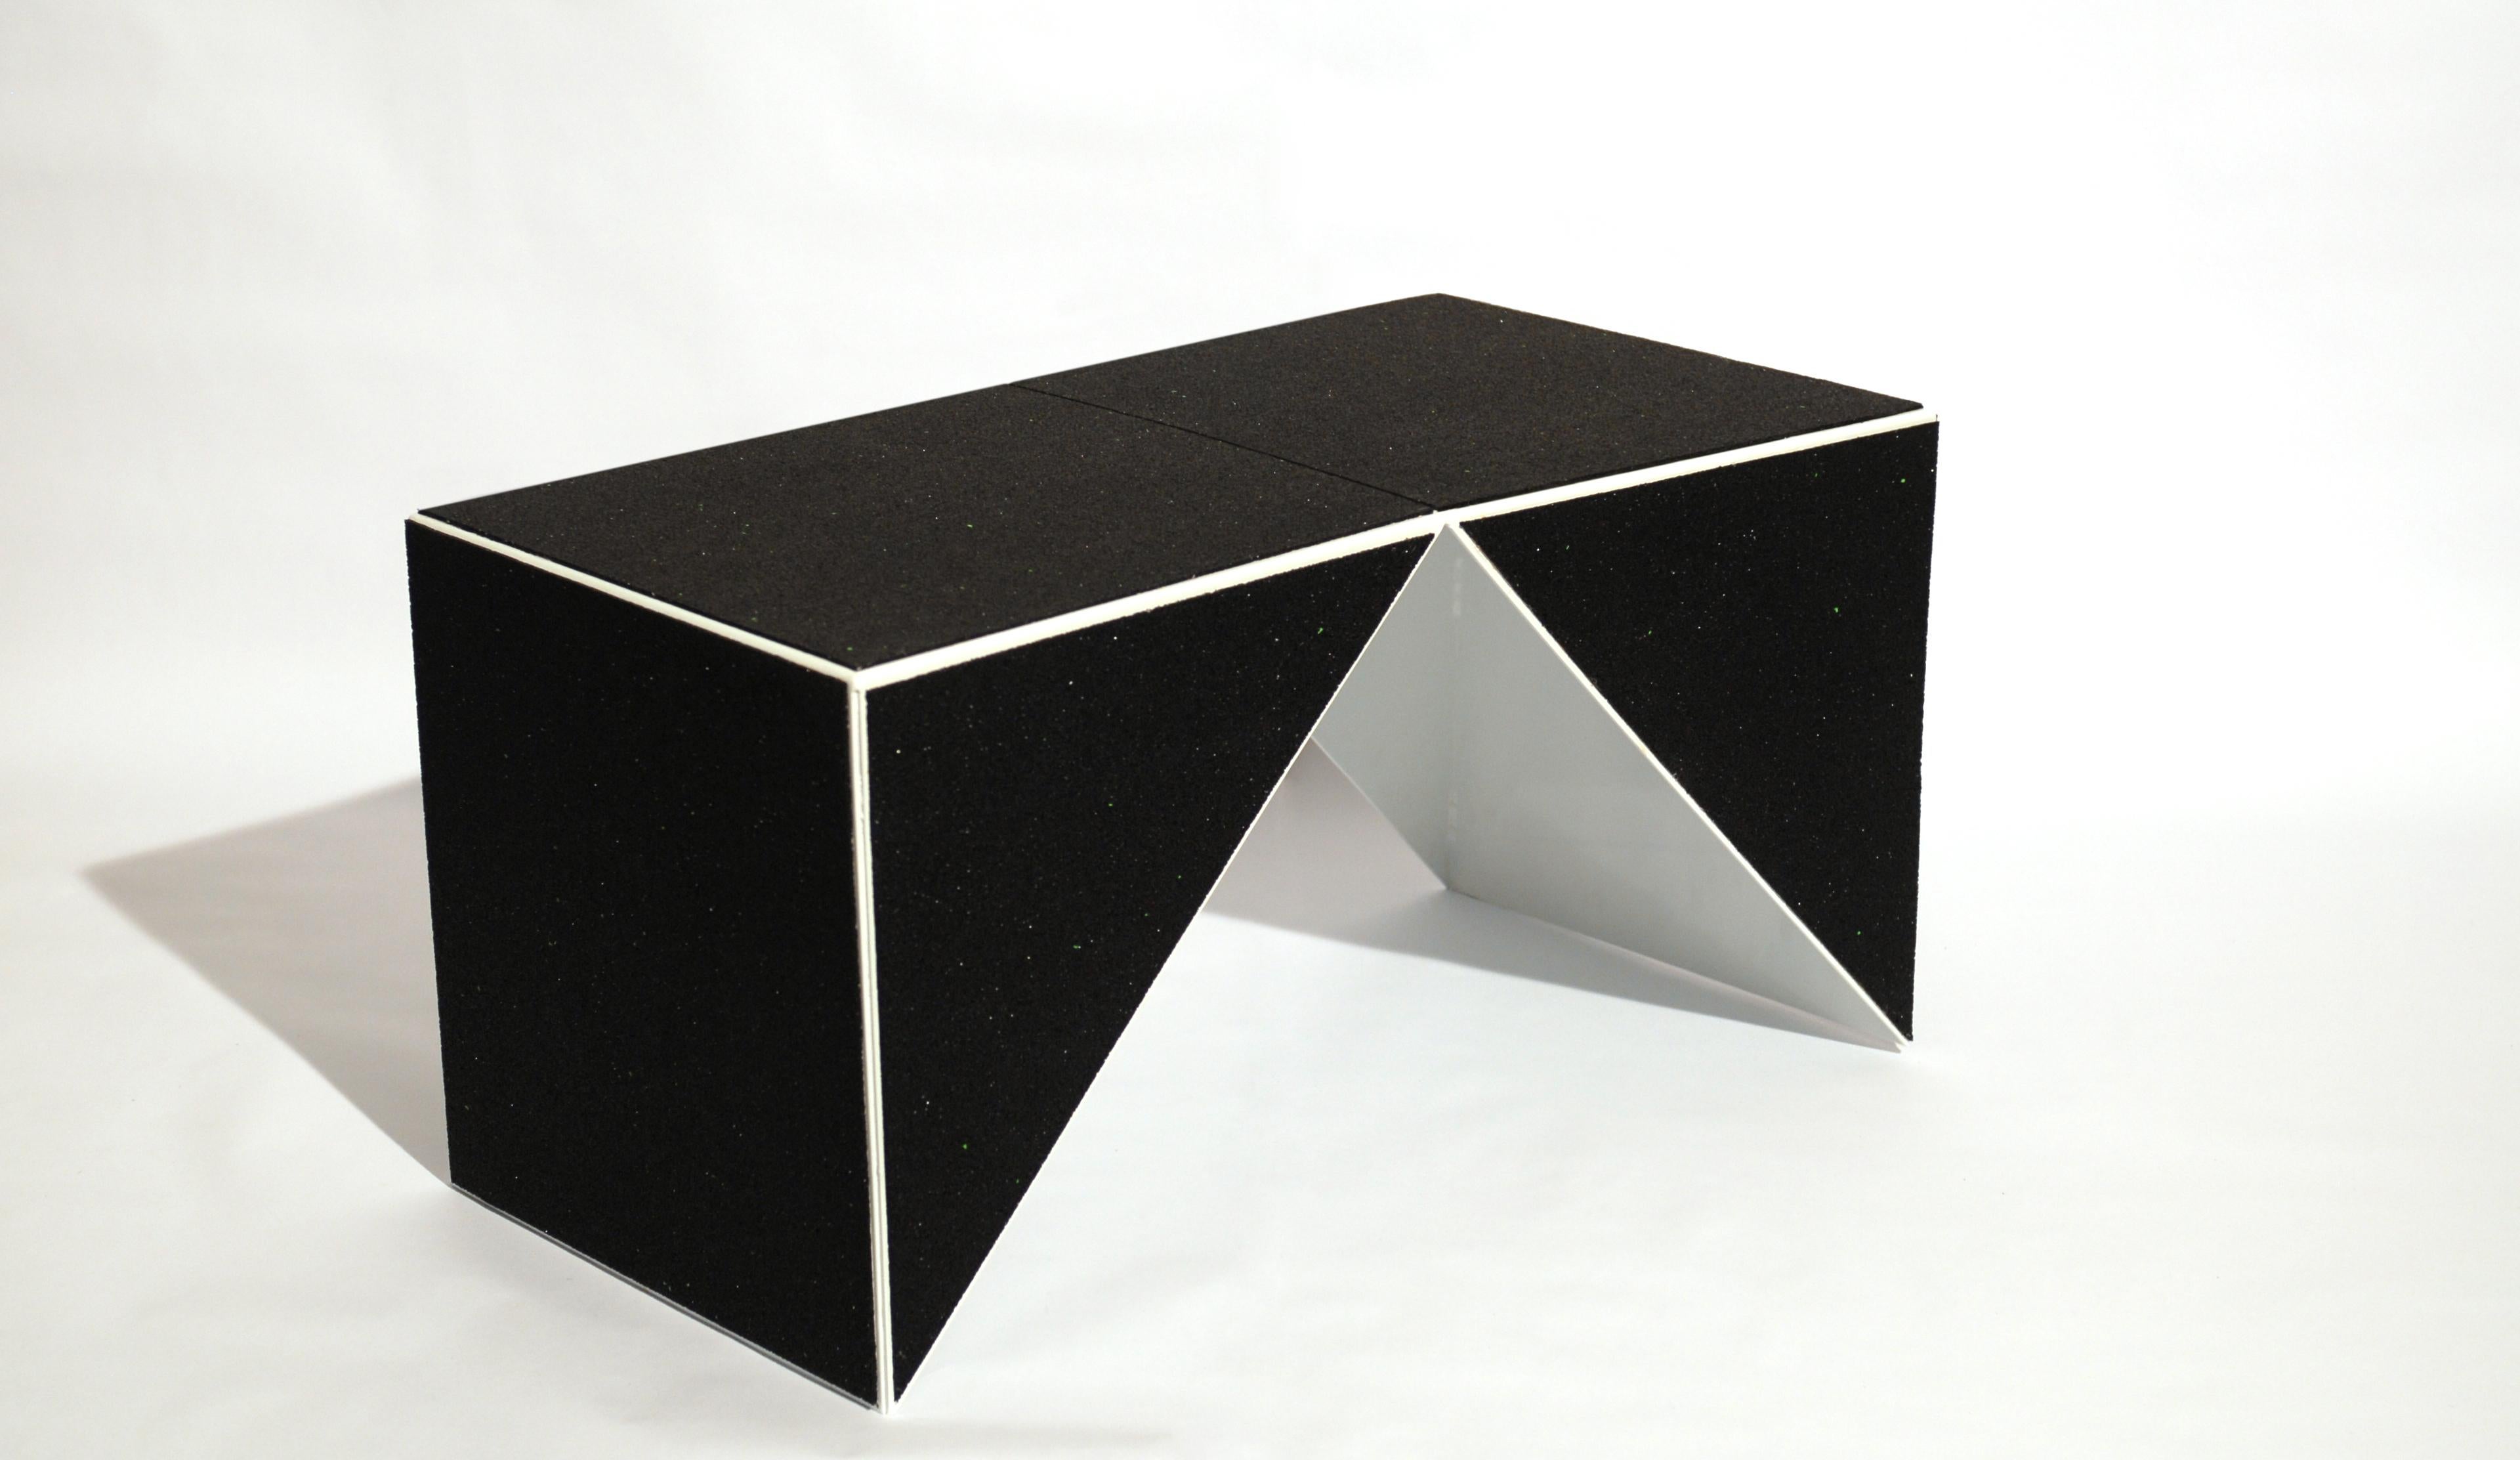 Casulo cube #3 by Mameluca
Material: Electrostatic Aluminum paint, recycled rubber blanket.
Dimensions: D45 x W90 x H45 cm
Also available in different dimensions.

Opening a cube and transforming it into a plan was the starting point for the